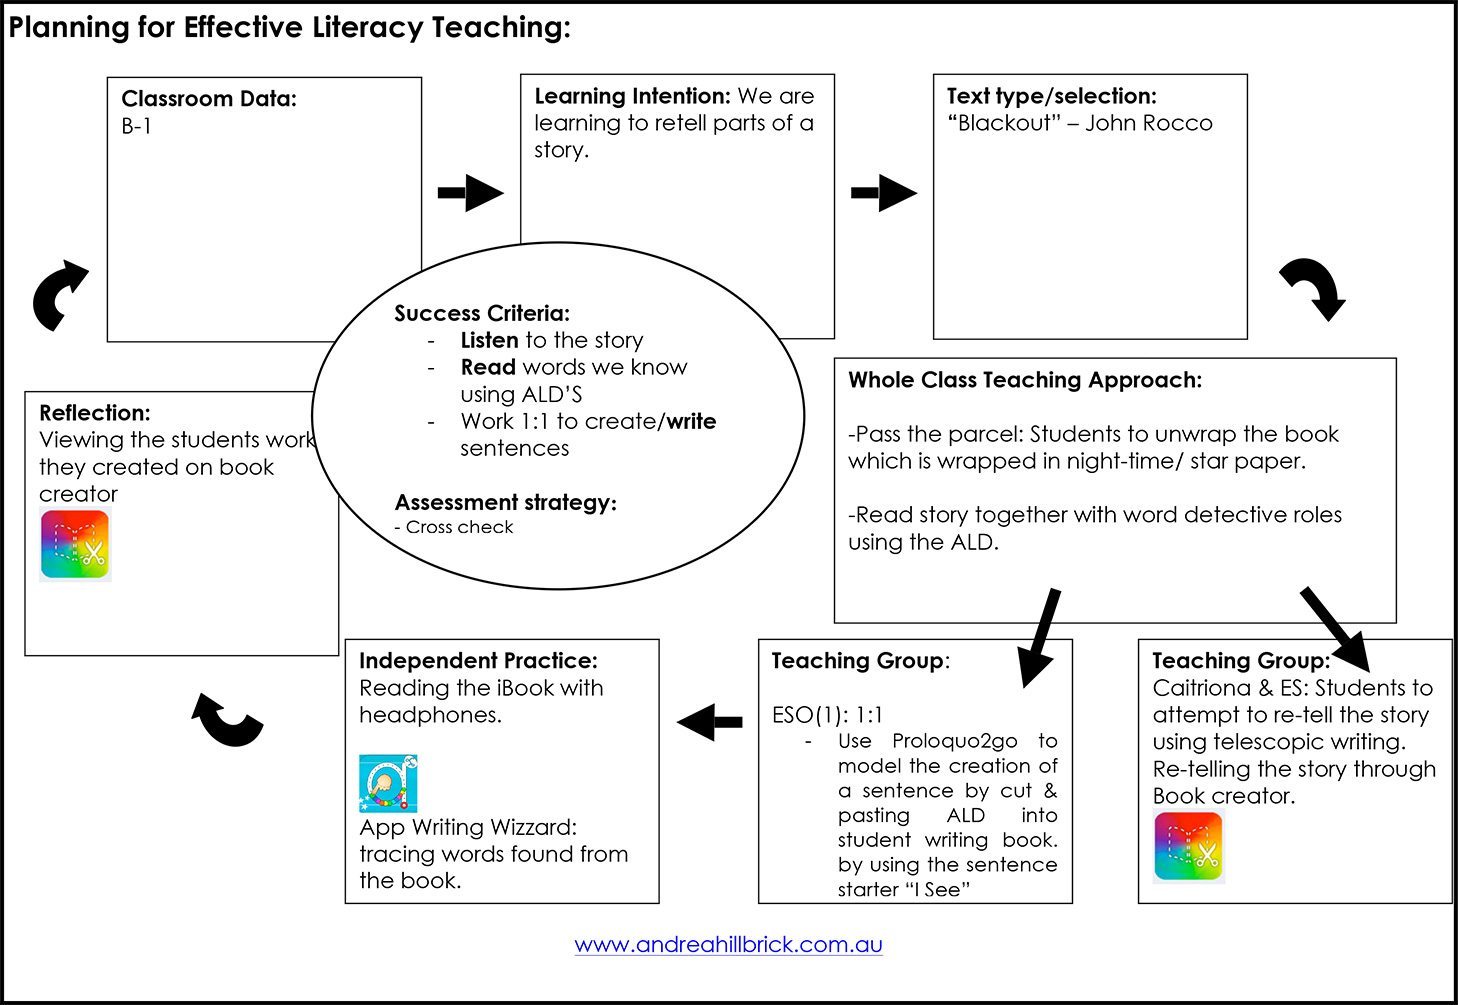 Planning for effective literacy teaching